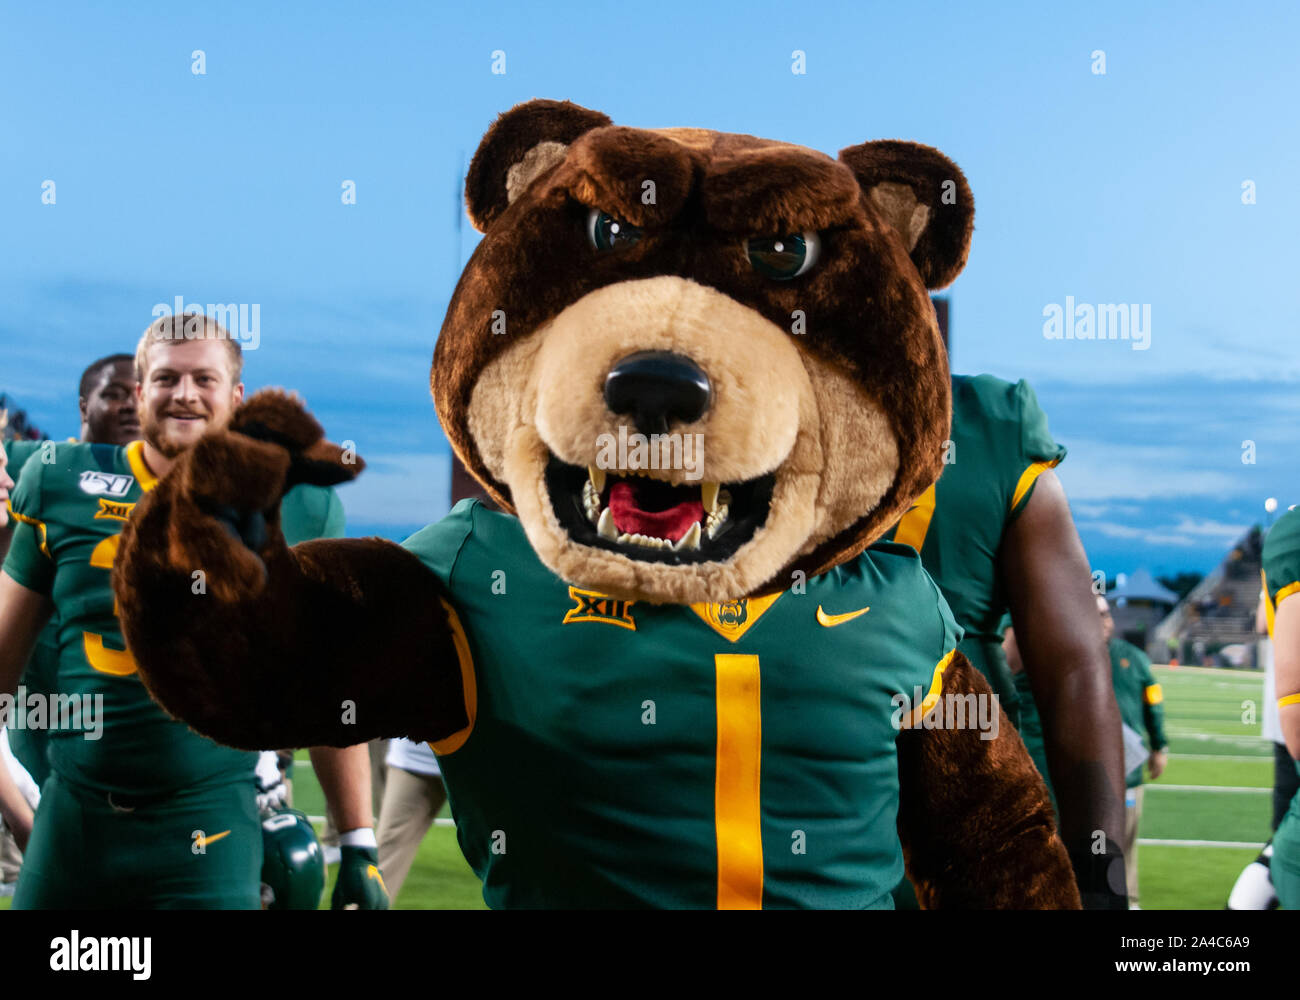 Waco, Texas, USA. 12th Oct, 2019. Baylor Bears mascot (Bruiser) celebrating the double overtime victory over Texas Tech Red Raiders 33-30 at the NCAA Football game between Texas Tech Red Raiders and the Baylor Bears at McLane Stadium in Waco, Texas. Matthew Lynch/CSM/Alamy Live News Stock Photo